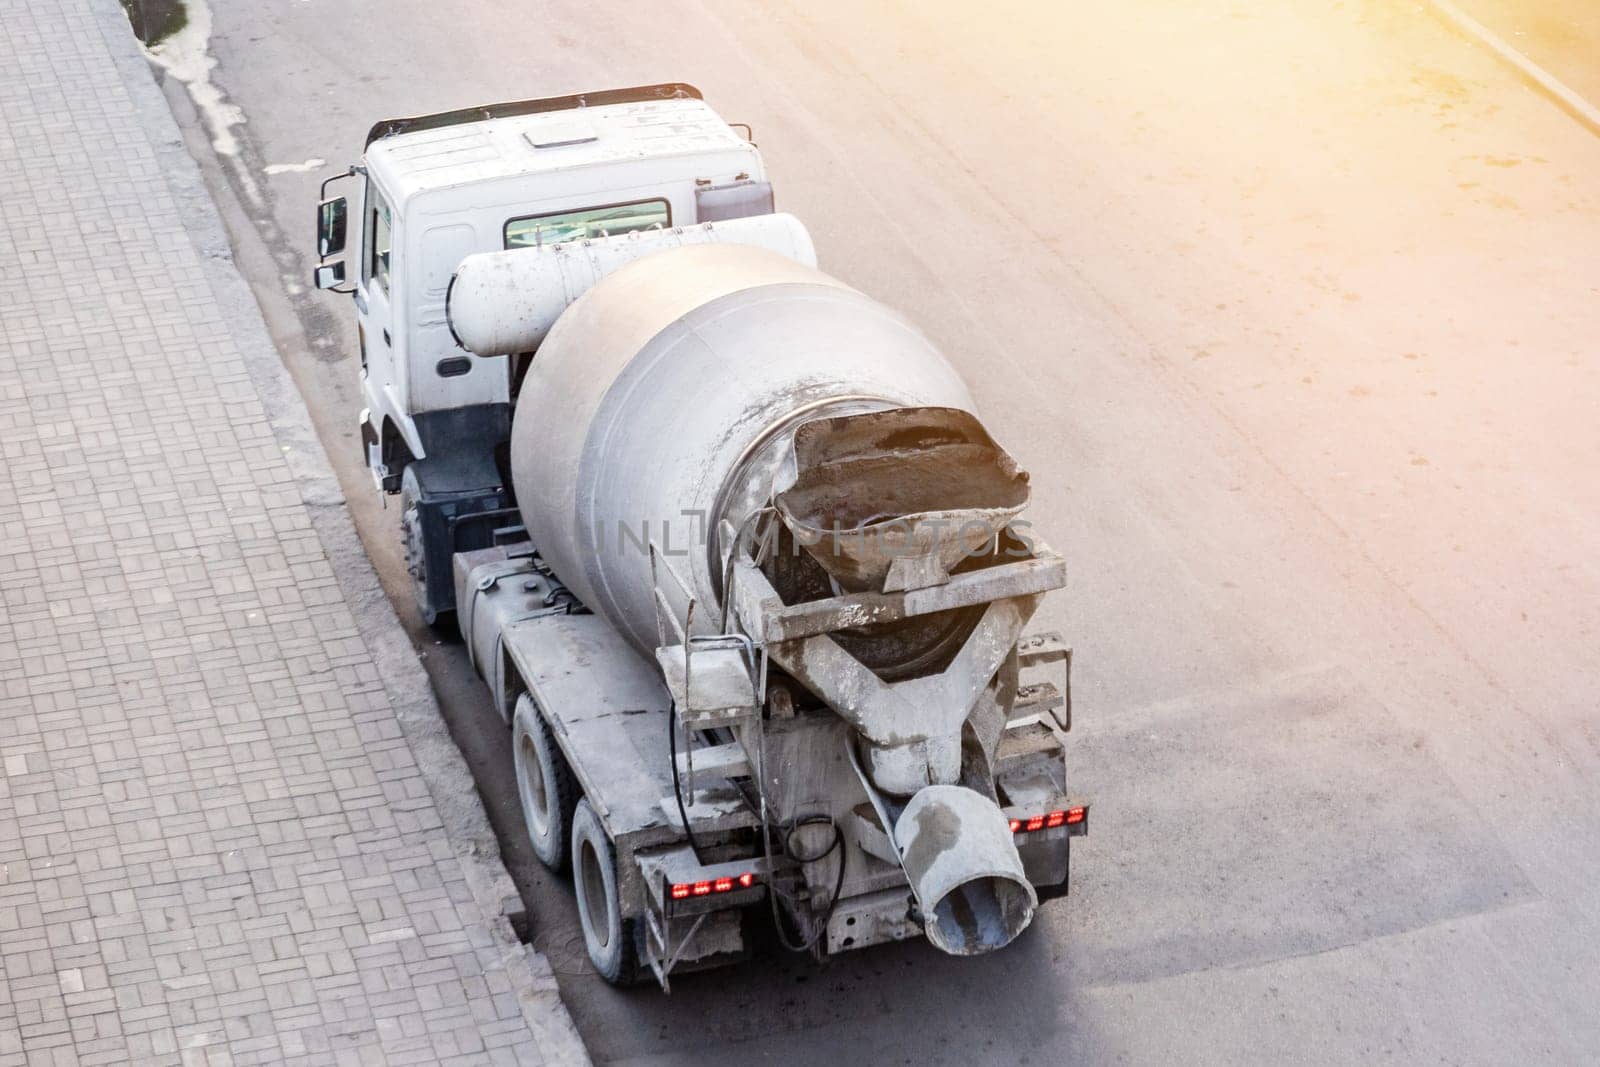 A concrete mixer truck stands on the road waiting in line to unload concrete, From Above view.